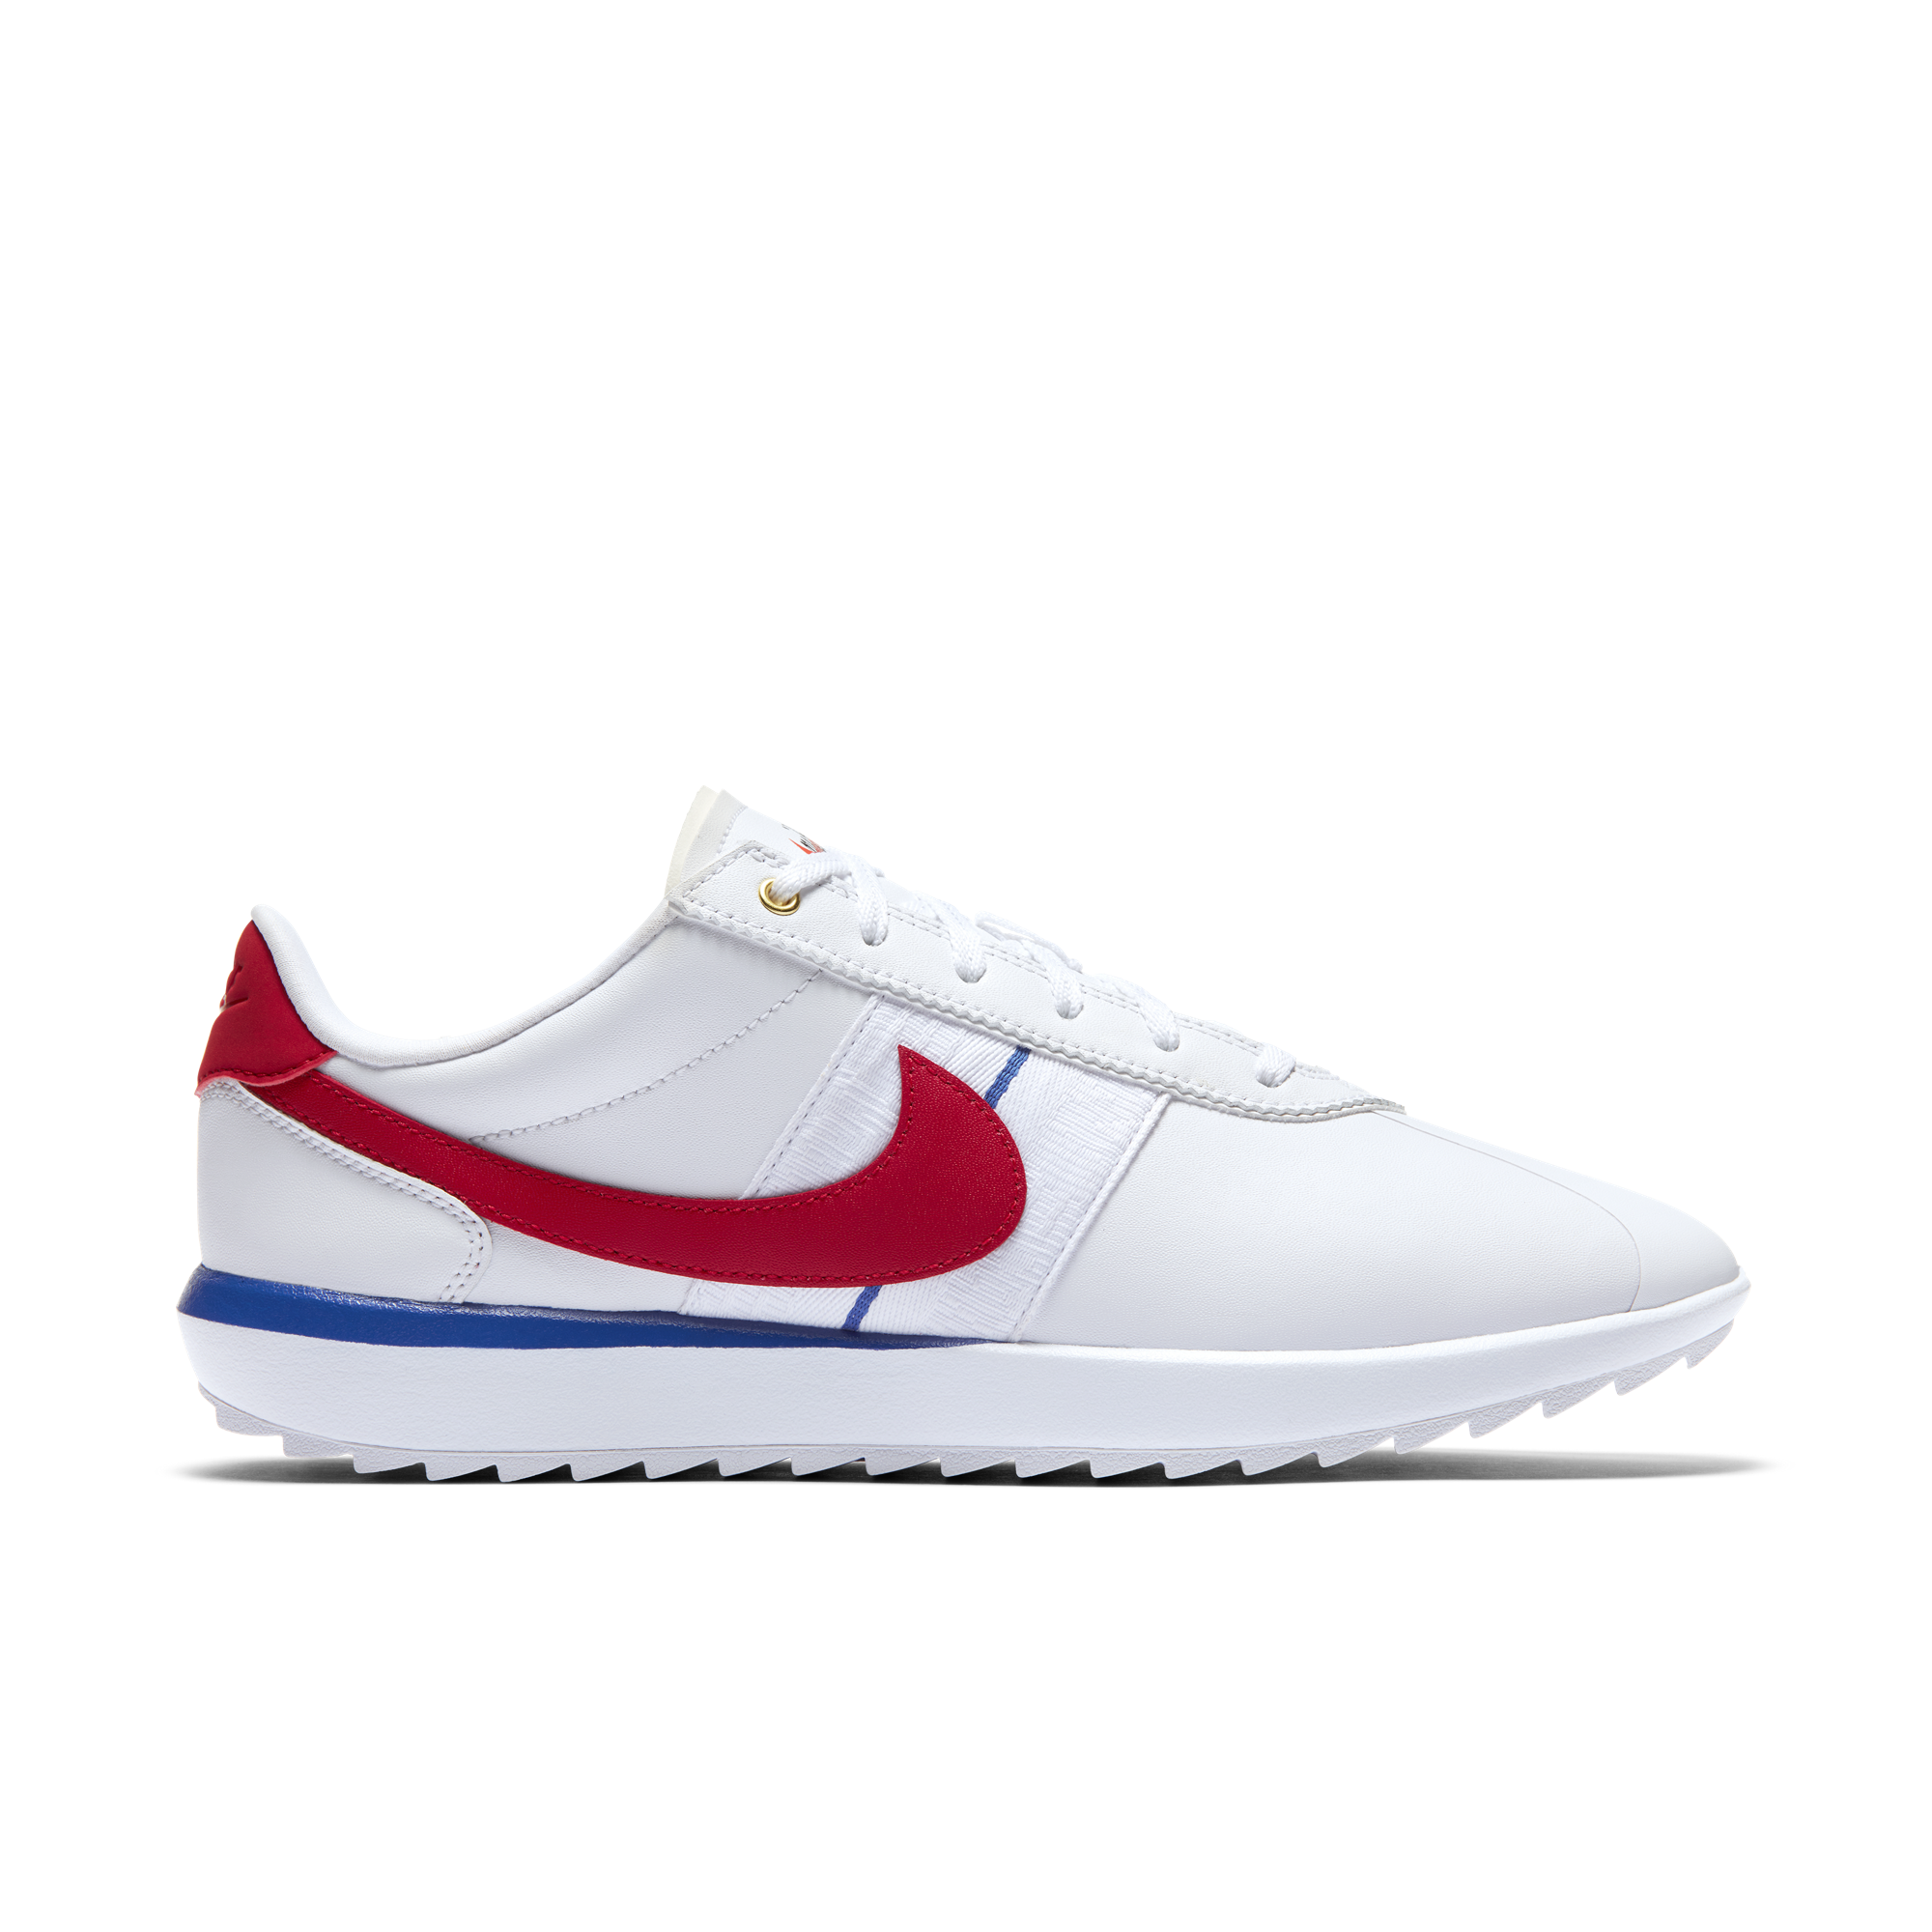 nike shoes white red